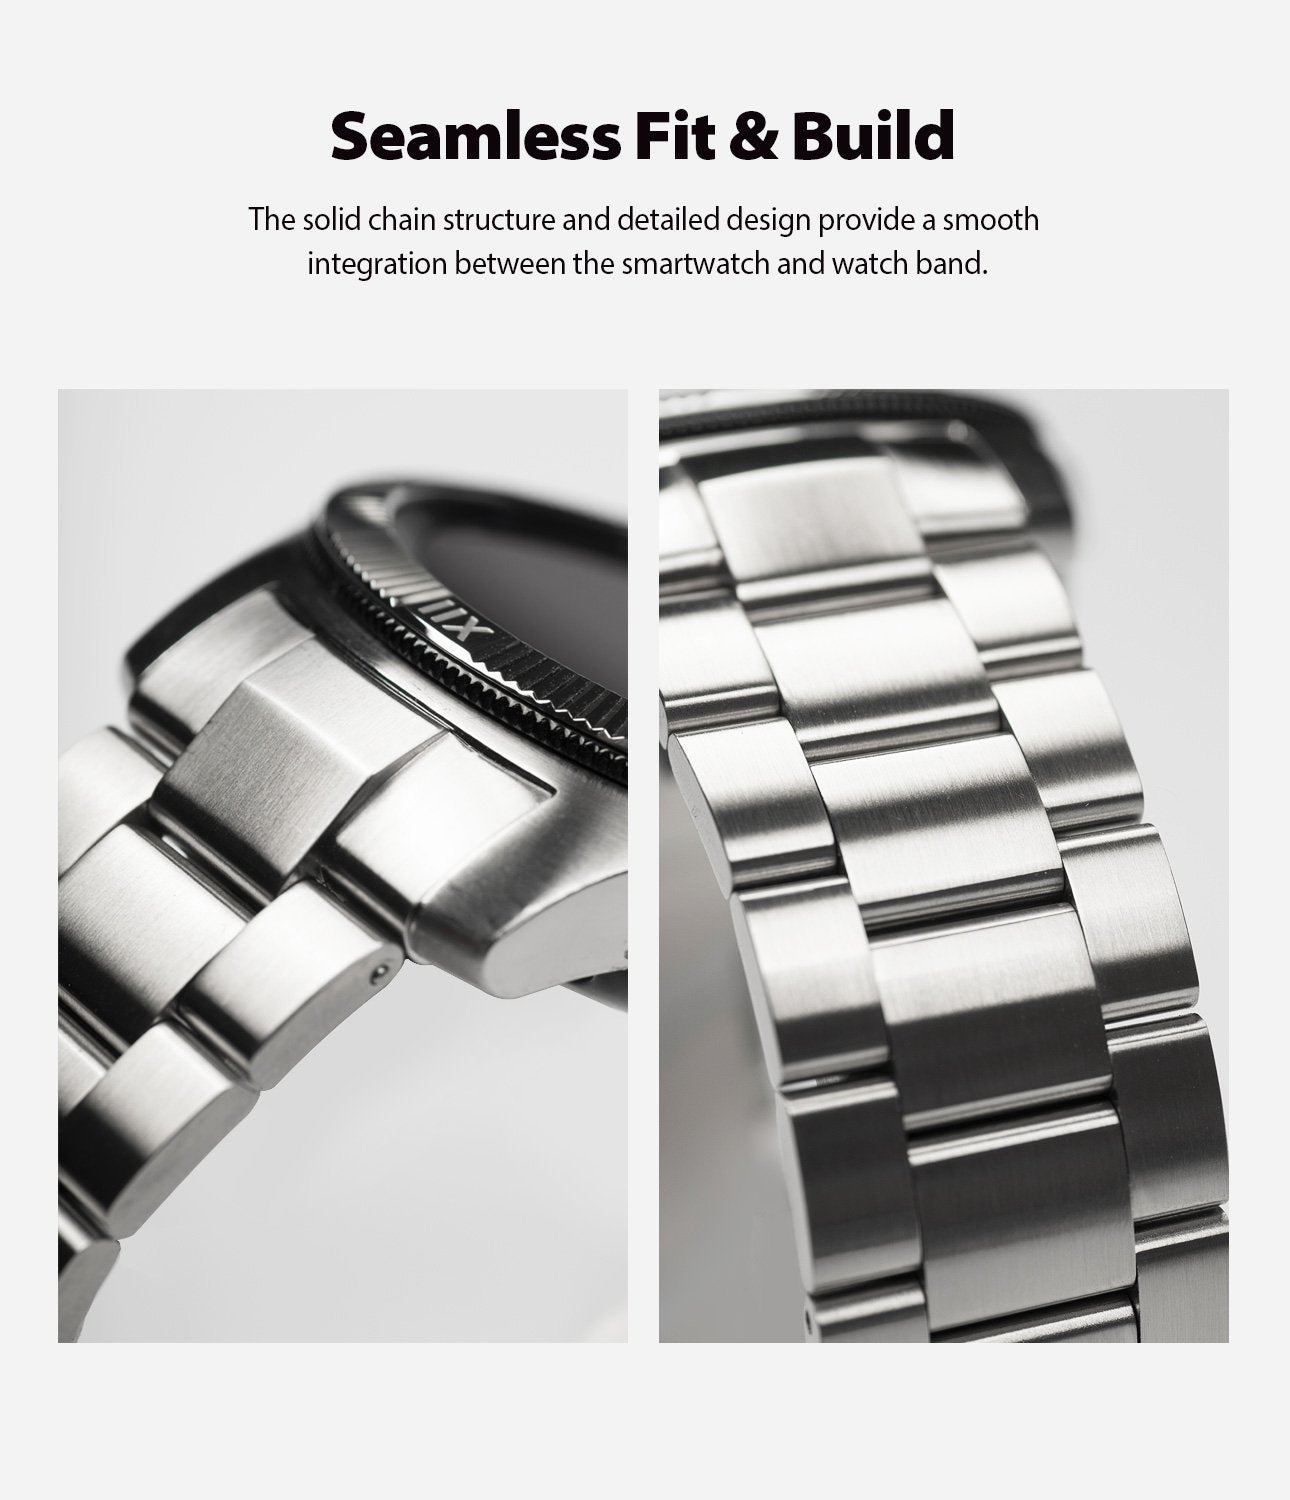 seamless fit and build with the solid chain structure and detailed design providing smooth integration between smart watch and watch band